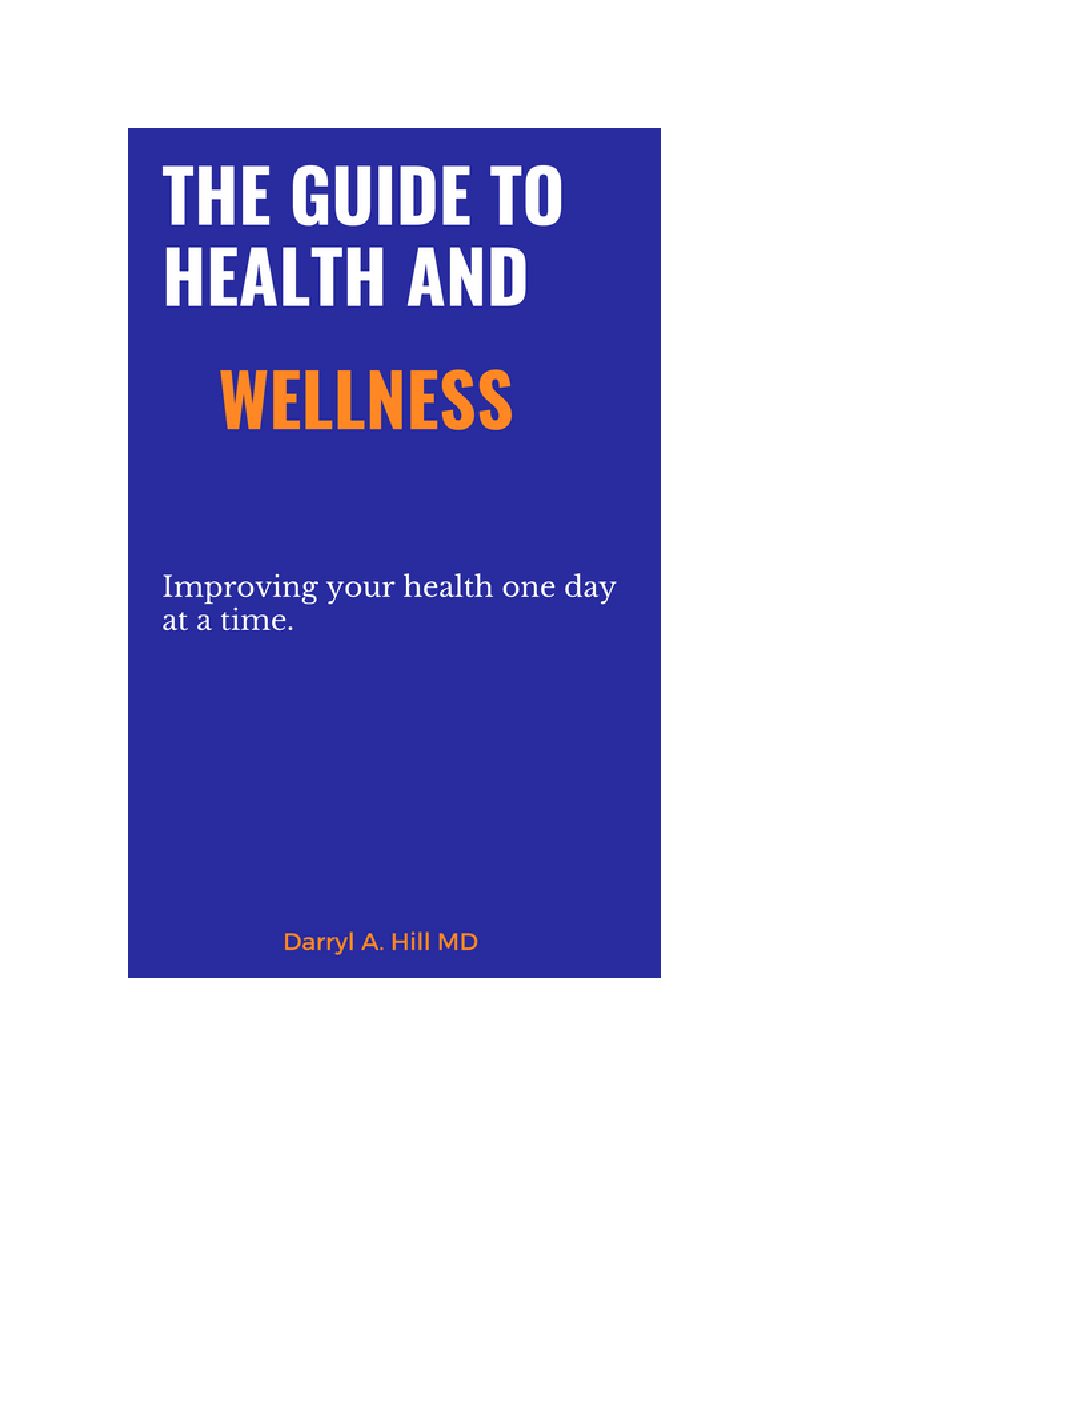 Guide to Health and Wellness